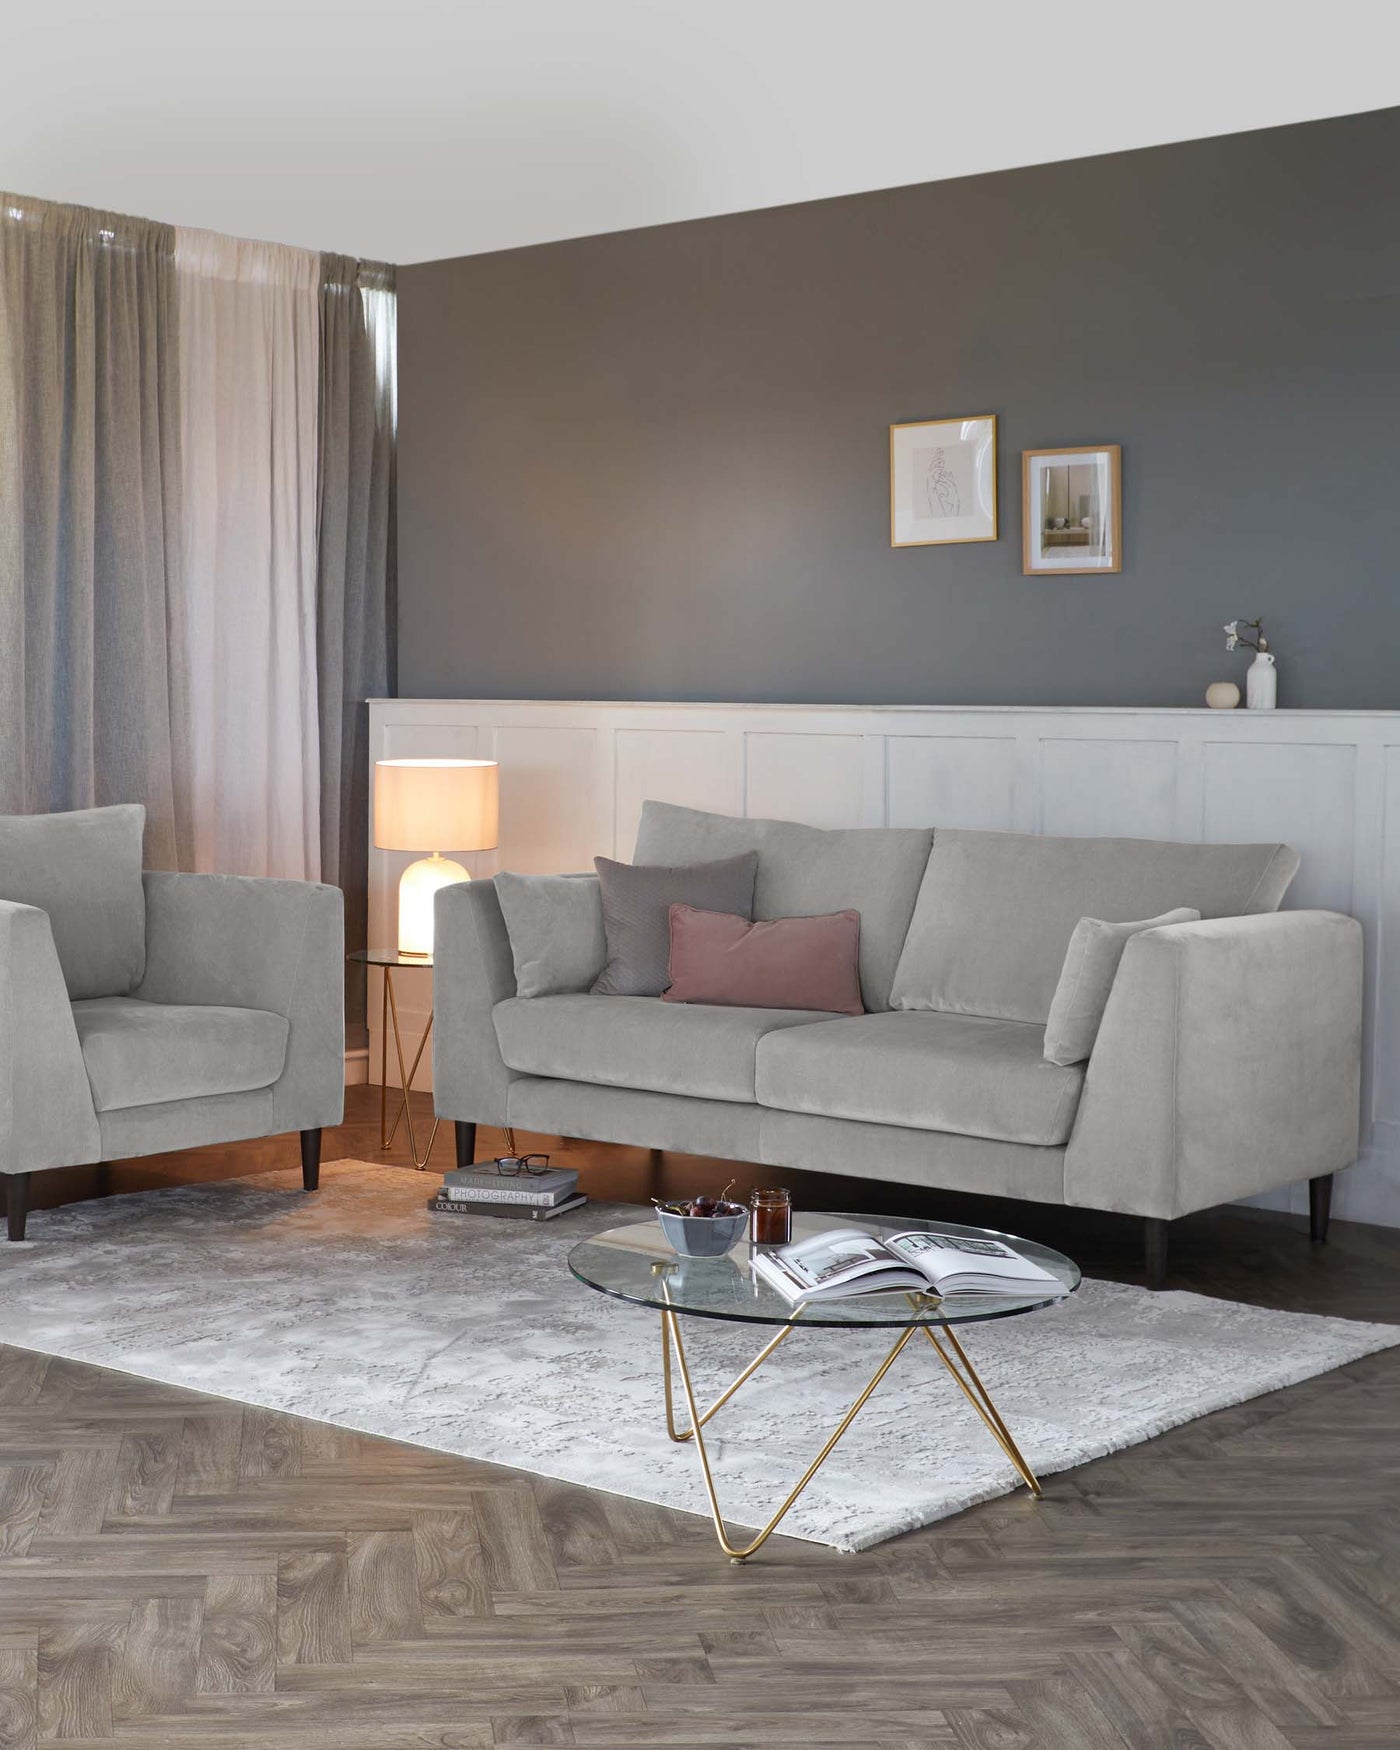 Modern living room furniture set featuring a light grey upholstered sofa with clean lines and matching armchair, both with dark wood legs. A round glass coffee table with a gold metal geometric base positioned on a muted grey and white area rug. The room is accessorized with a soft pink lumbar pillow, a white table lamp with a linen shade, and small decorative items atop the coffee table and side table.